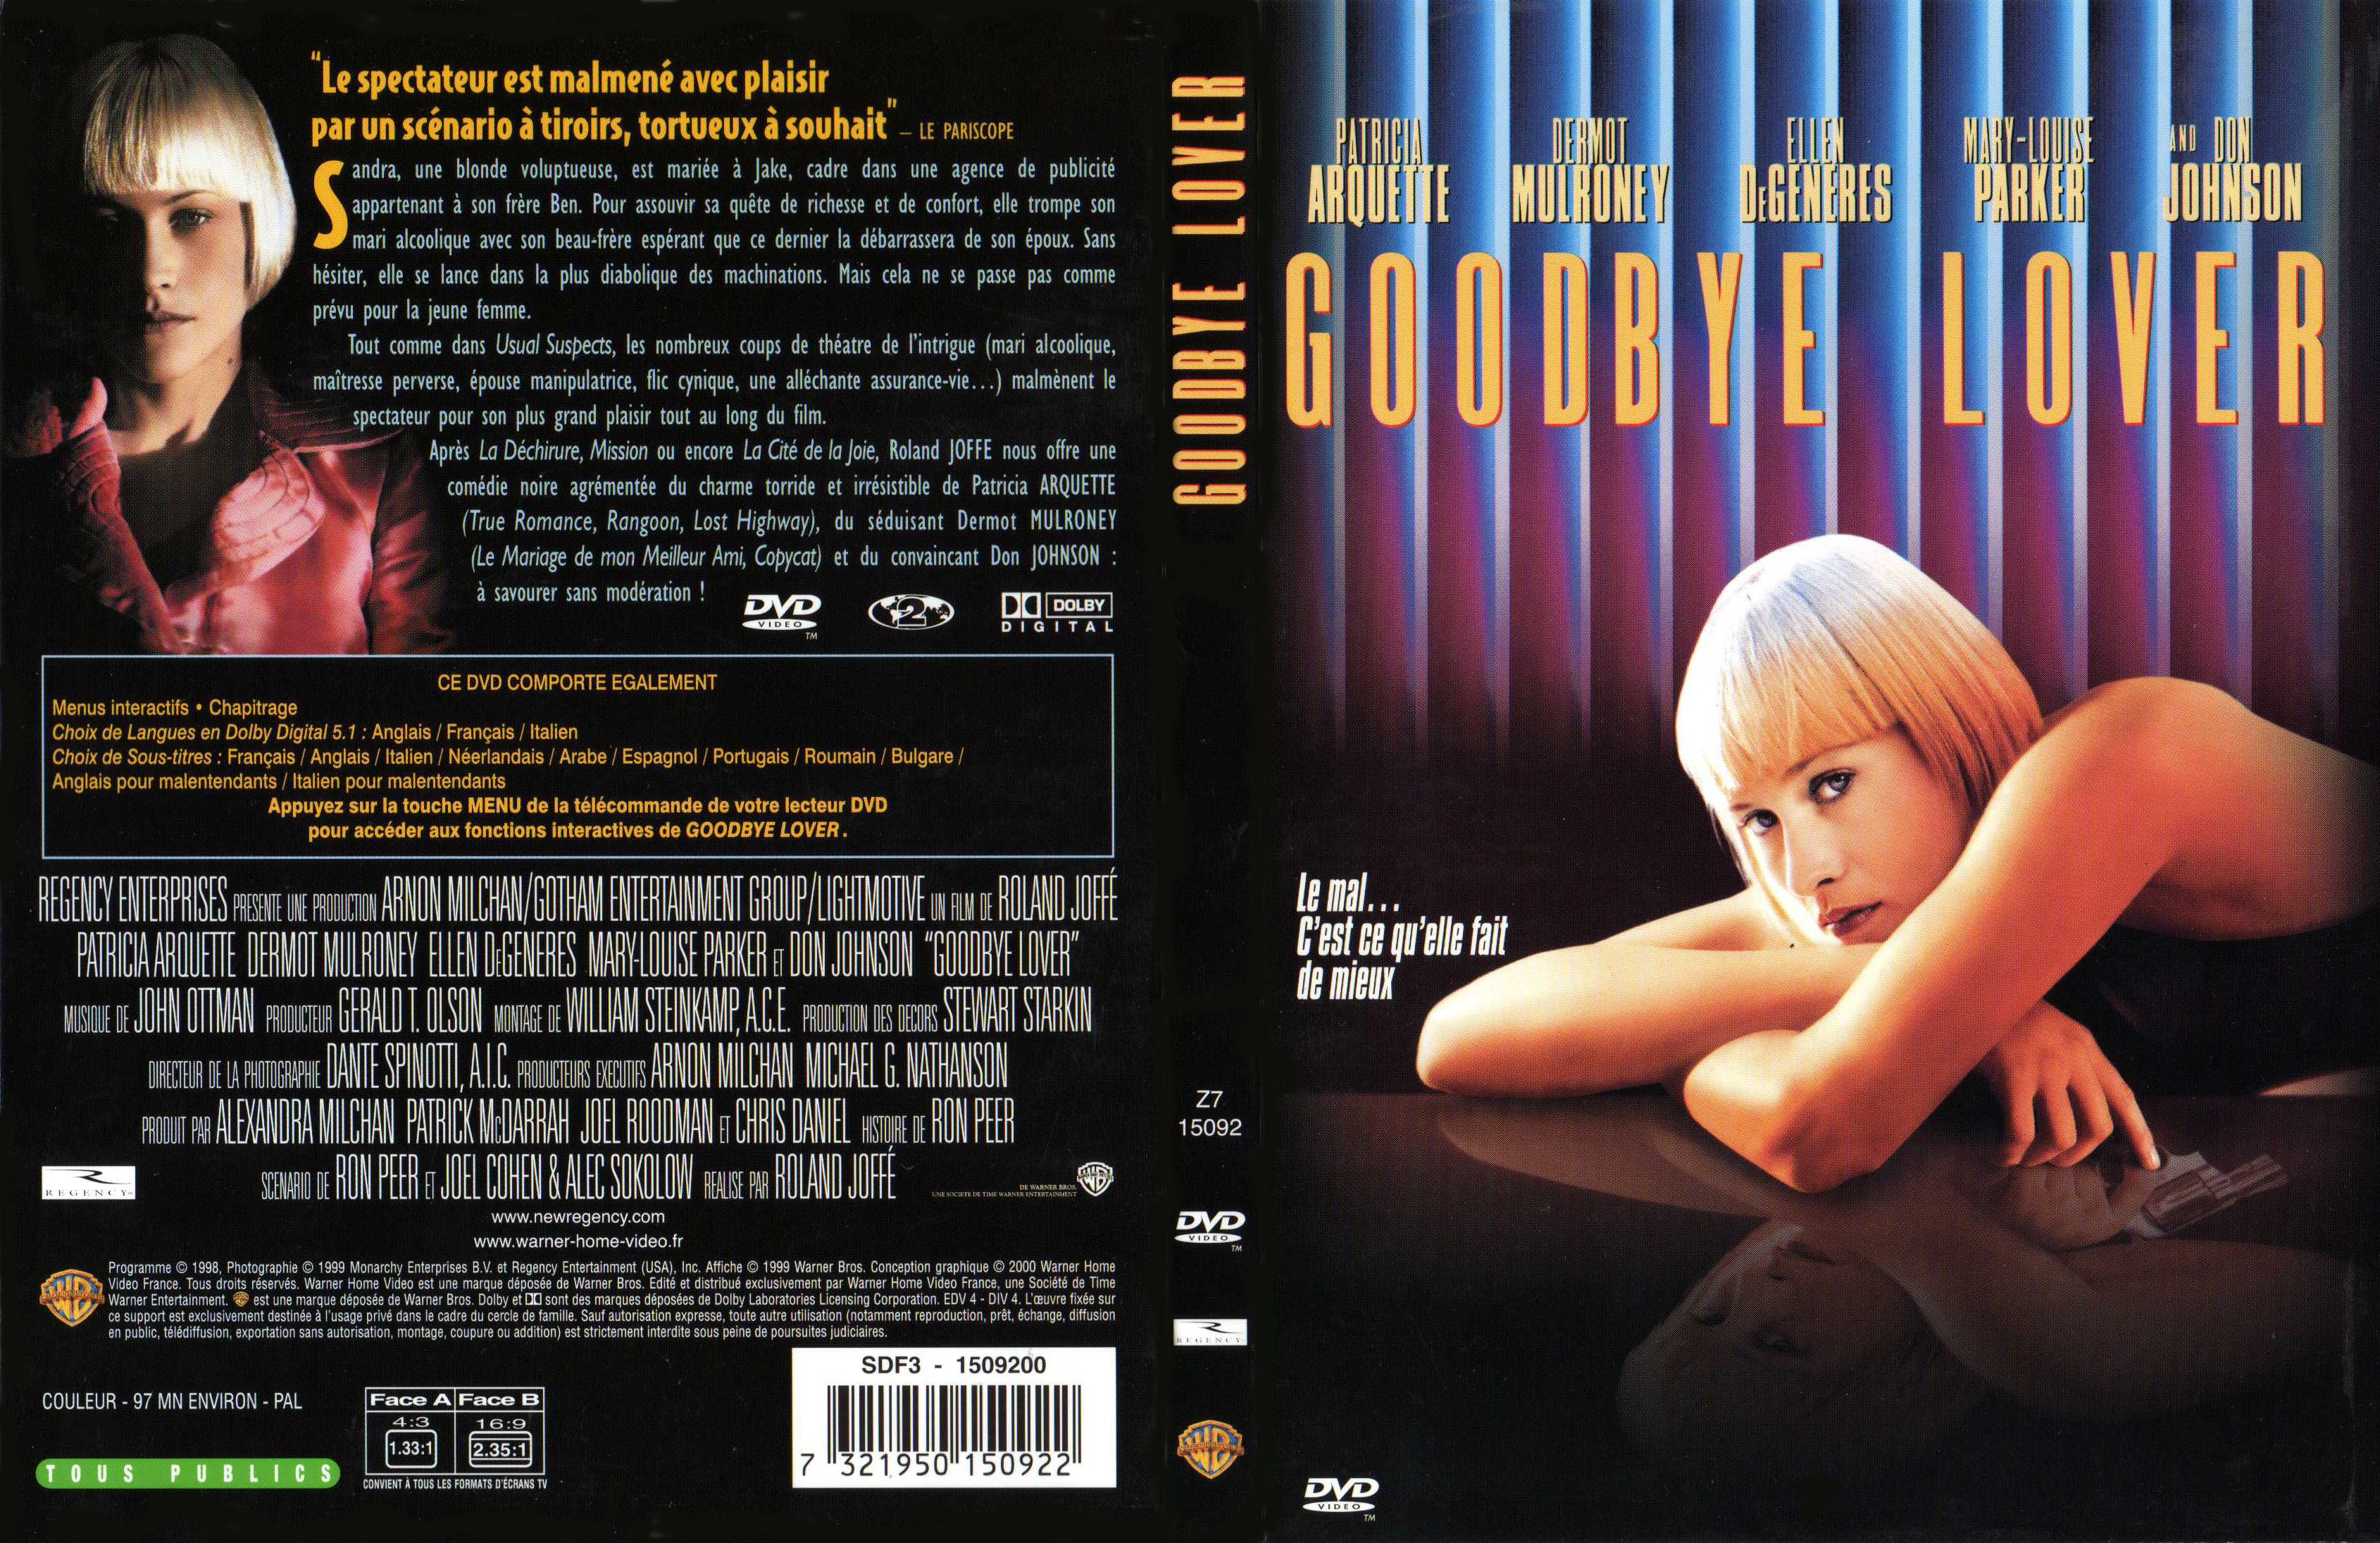 Jaquette DVD Goodbye lover